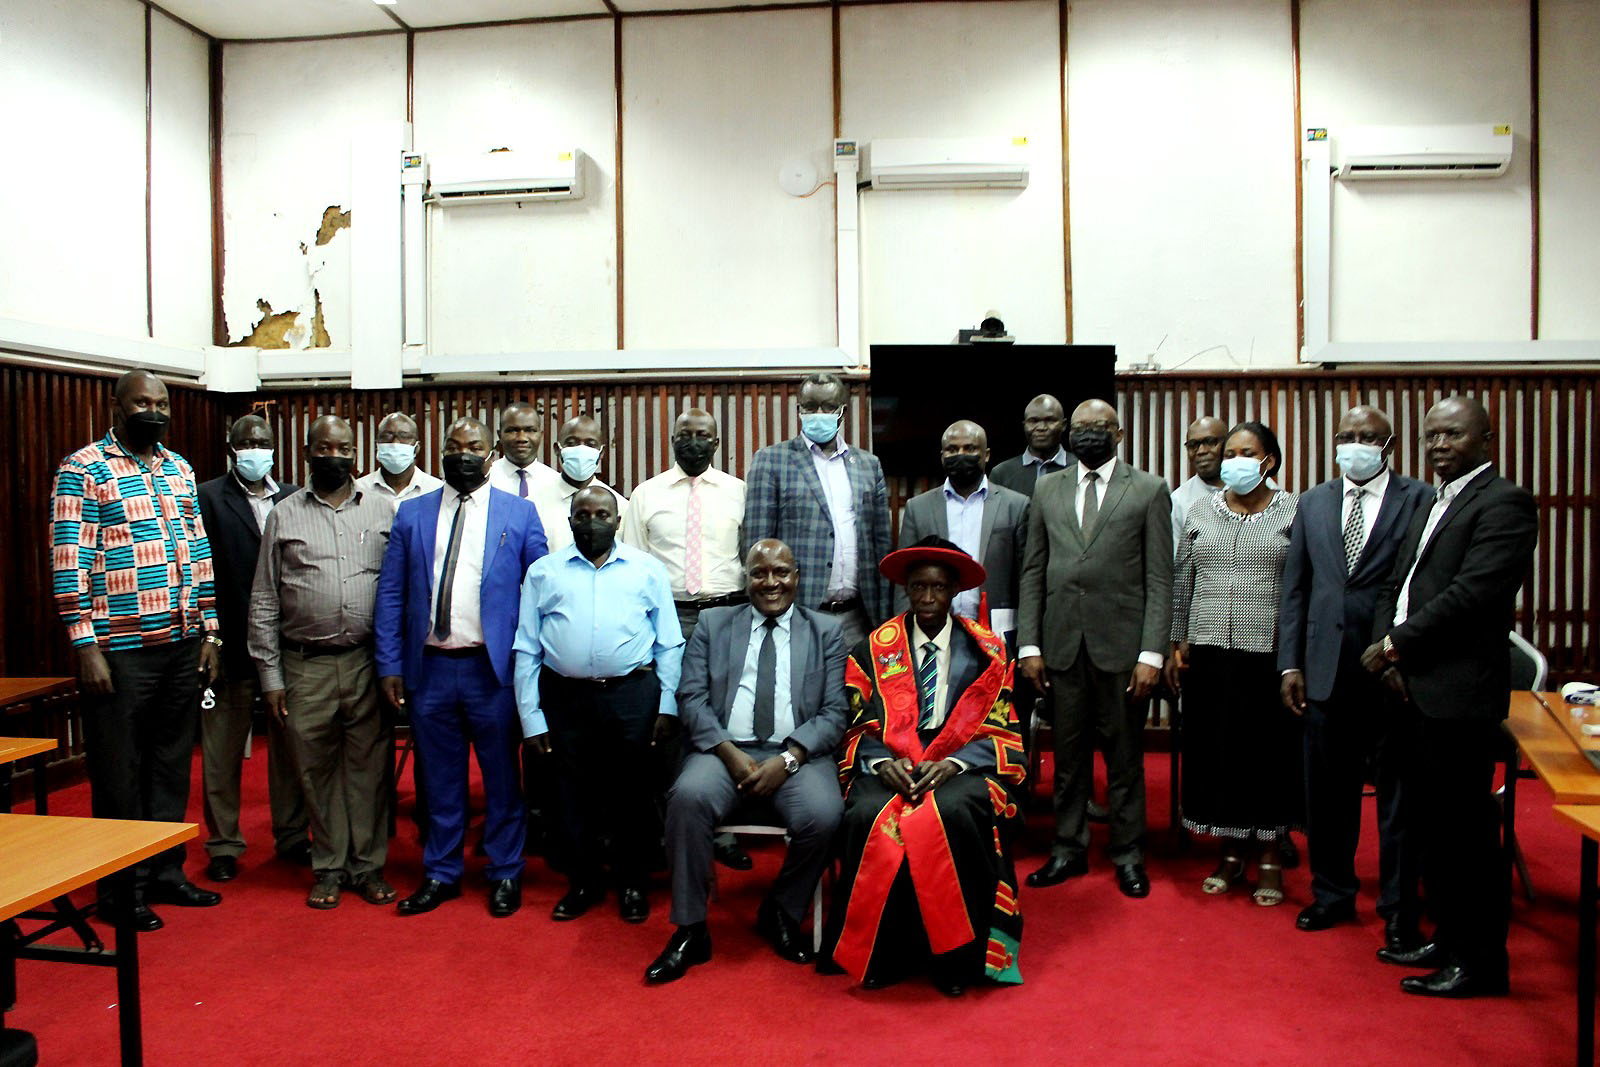 Seated L-R: Prof. Fred Masagazi Masaazi and Prof. Anthony Mugagga Muwagga with Members of Management and CEES Leadership that witnessed the handover ceremony on 11th February 2022, AVU Conference Room, Makerere University.